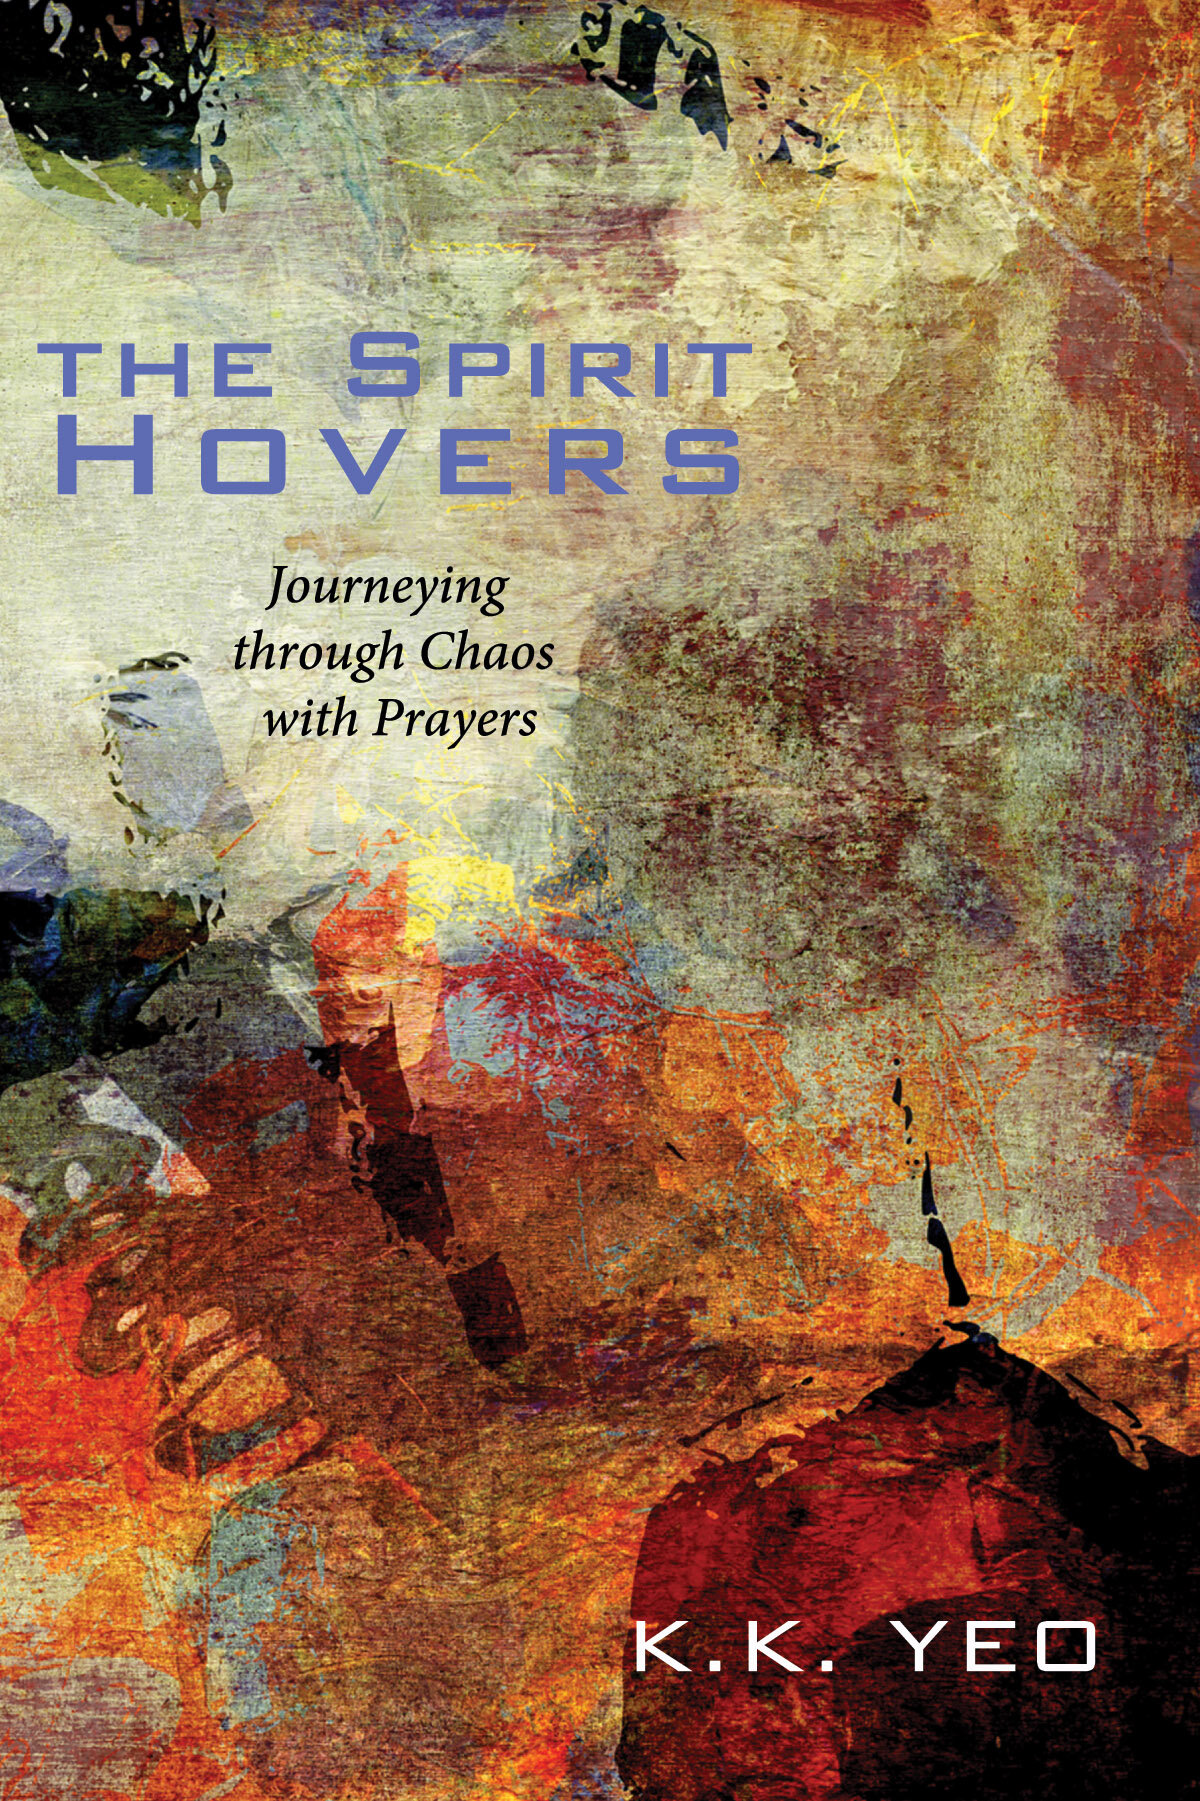 The Spirit Hovers: Journeying through Chaos with Prayers